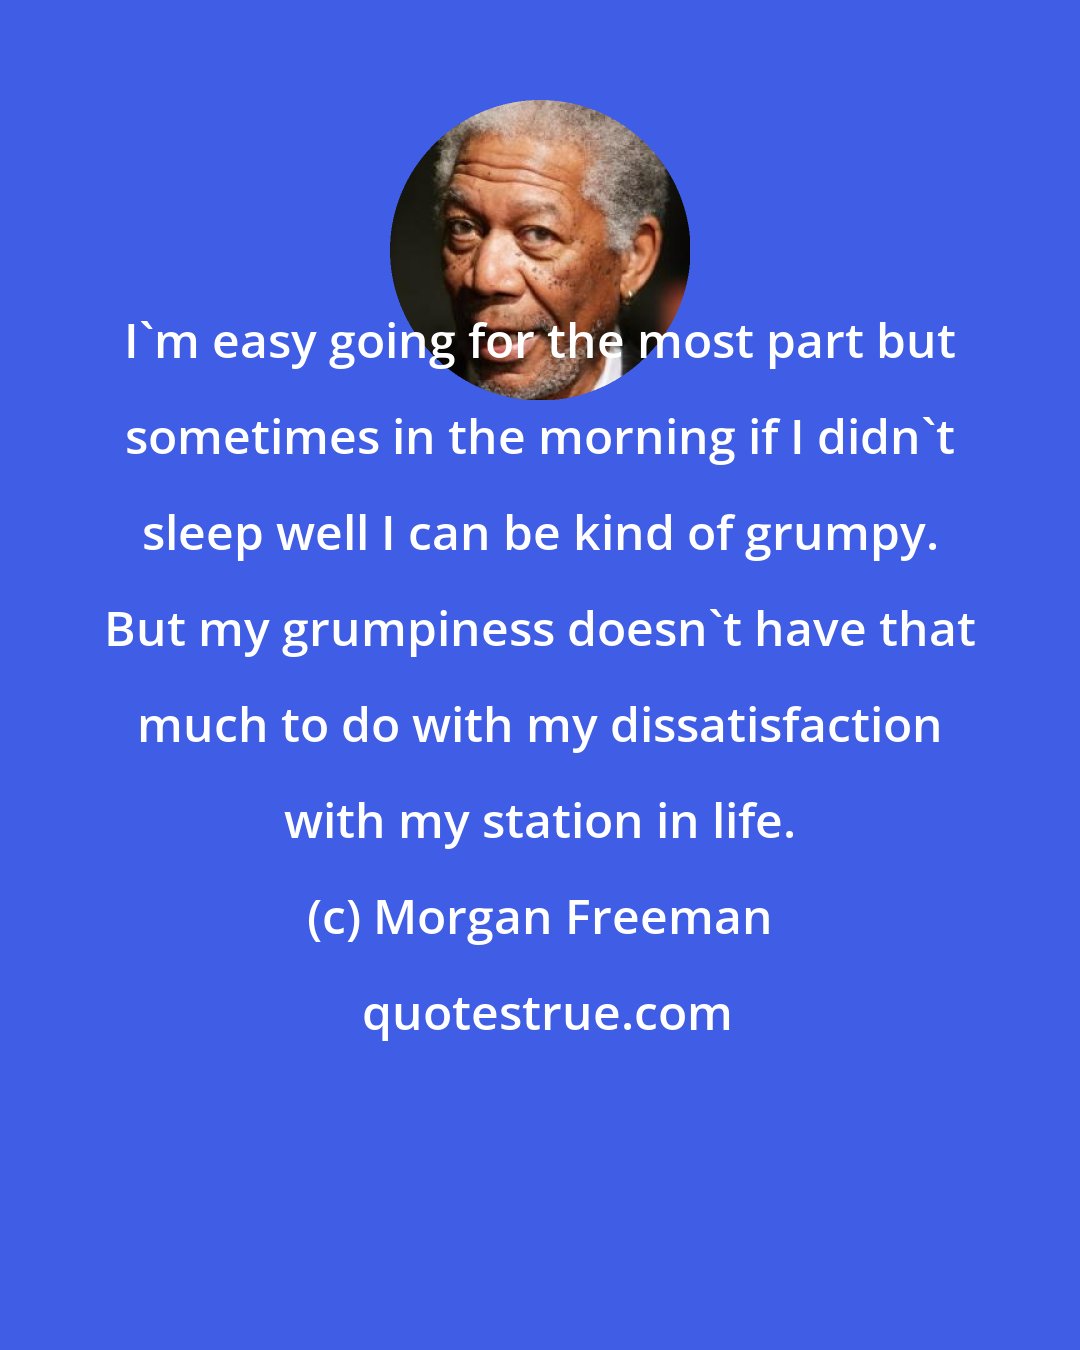 Morgan Freeman: I'm easy going for the most part but sometimes in the morning if I didn't sleep well I can be kind of grumpy. But my grumpiness doesn't have that much to do with my dissatisfaction with my station in life.